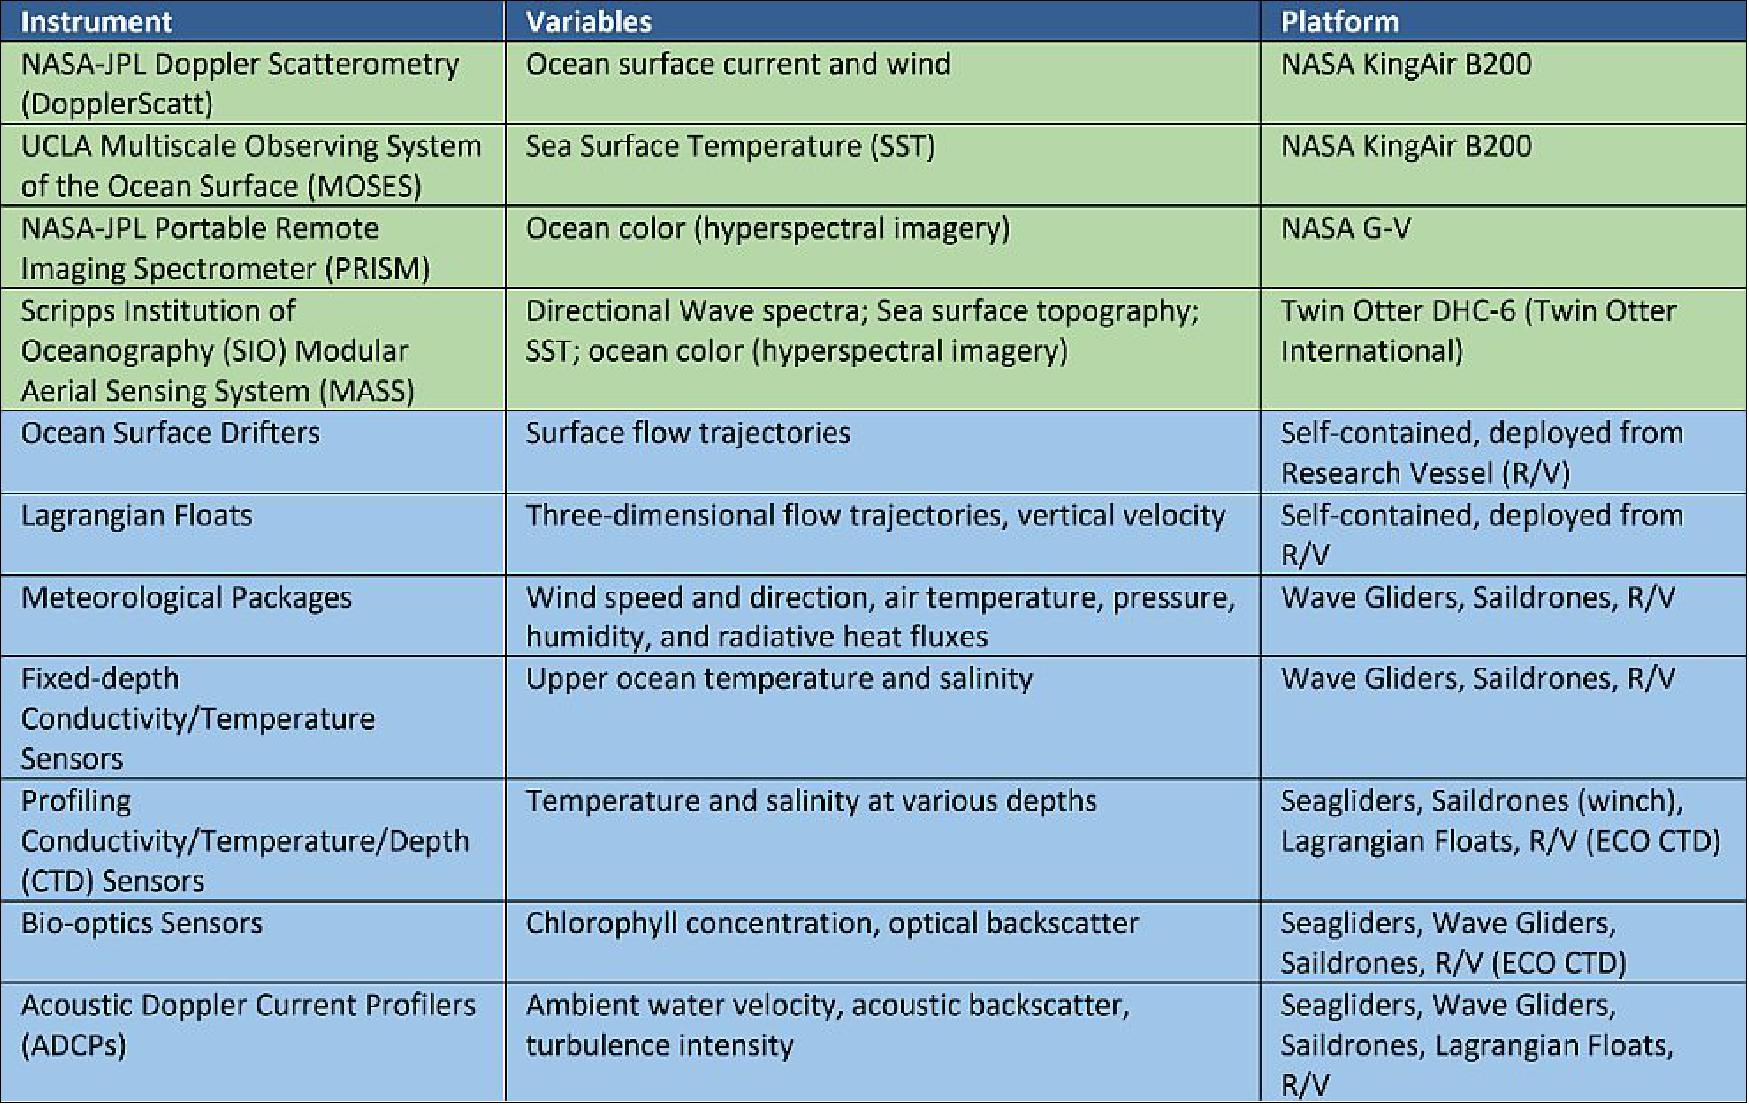 Table 1: Instruments that will be used in the S-MODE campaigns